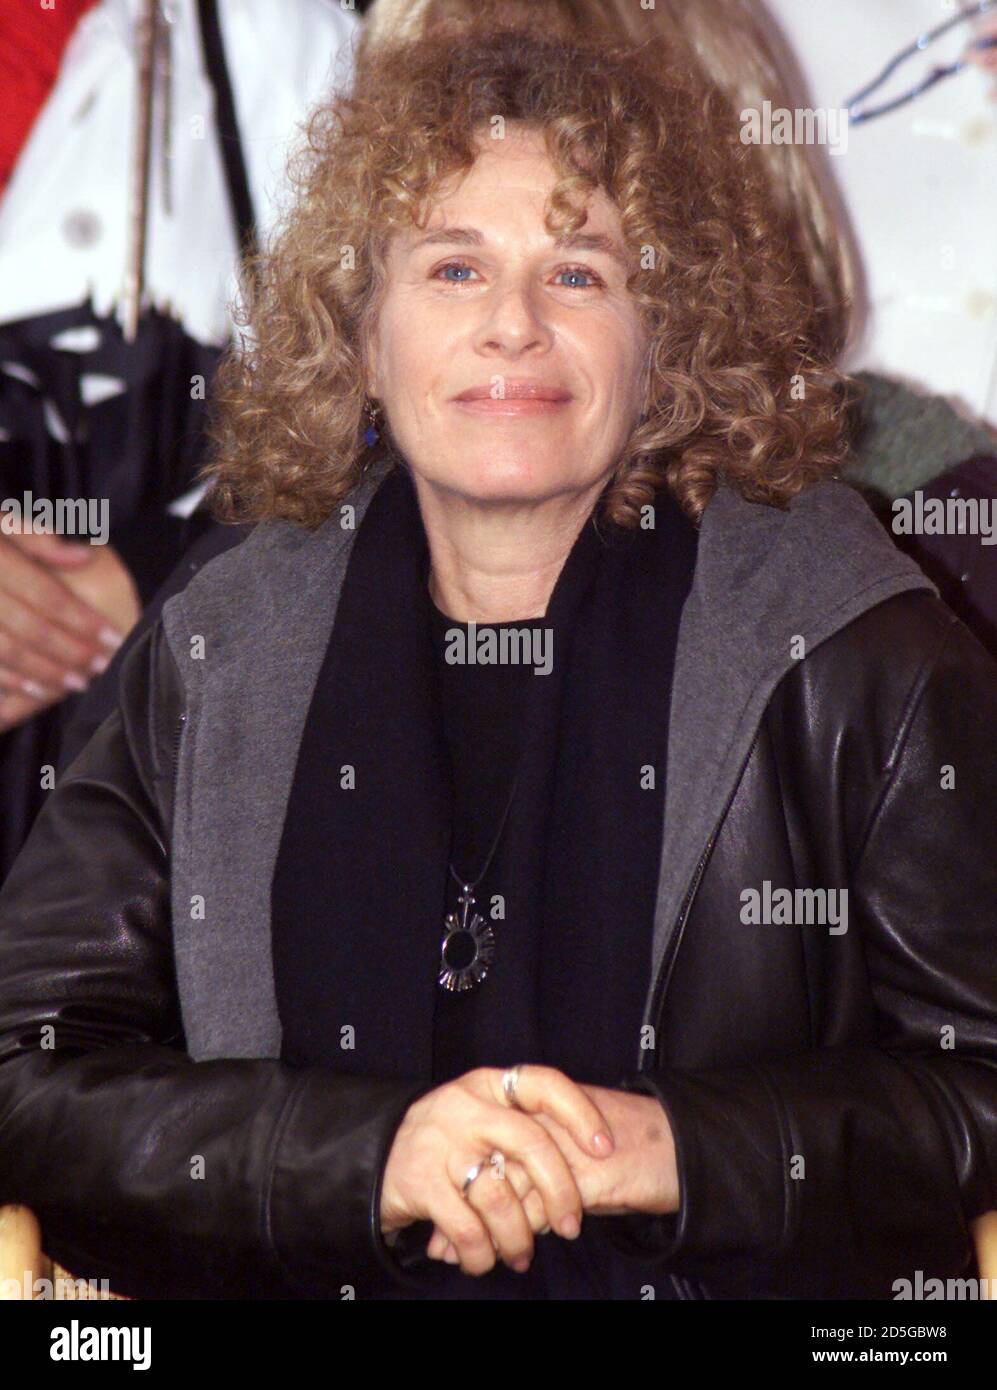 Singer and songwriter Carole King attends the ceremony for her friend,  Grammy and Academy Award winning songwriter [Carole Bayer Sager], who was  honored with a star on the Hollywood Walk of Fame,